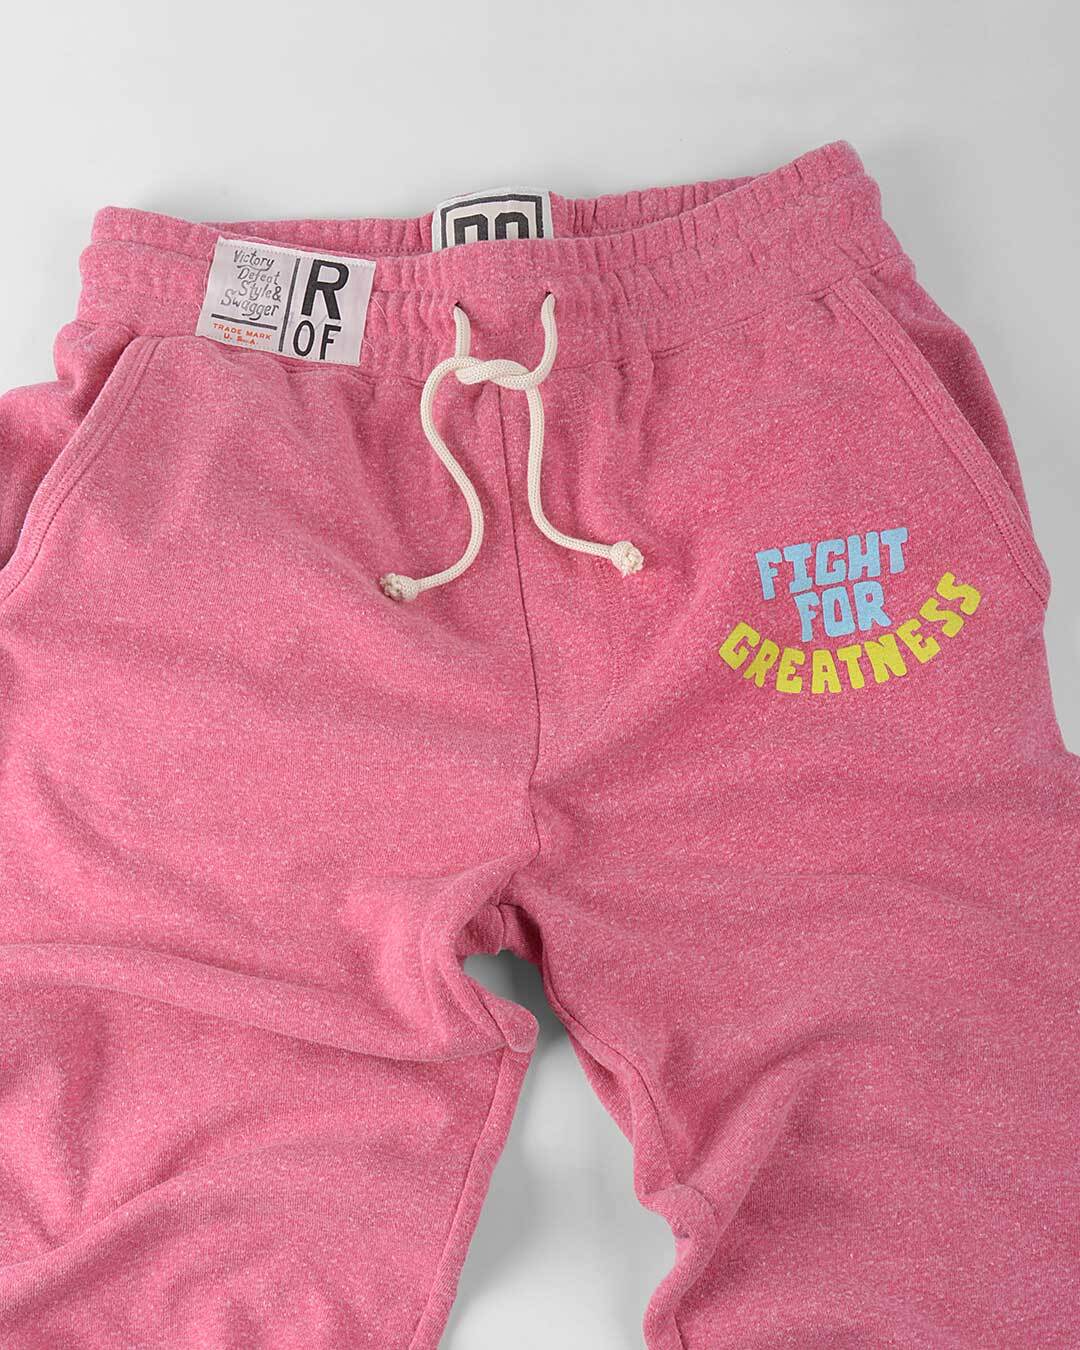 BHT - Culture of Greatness Pink Sweatpants